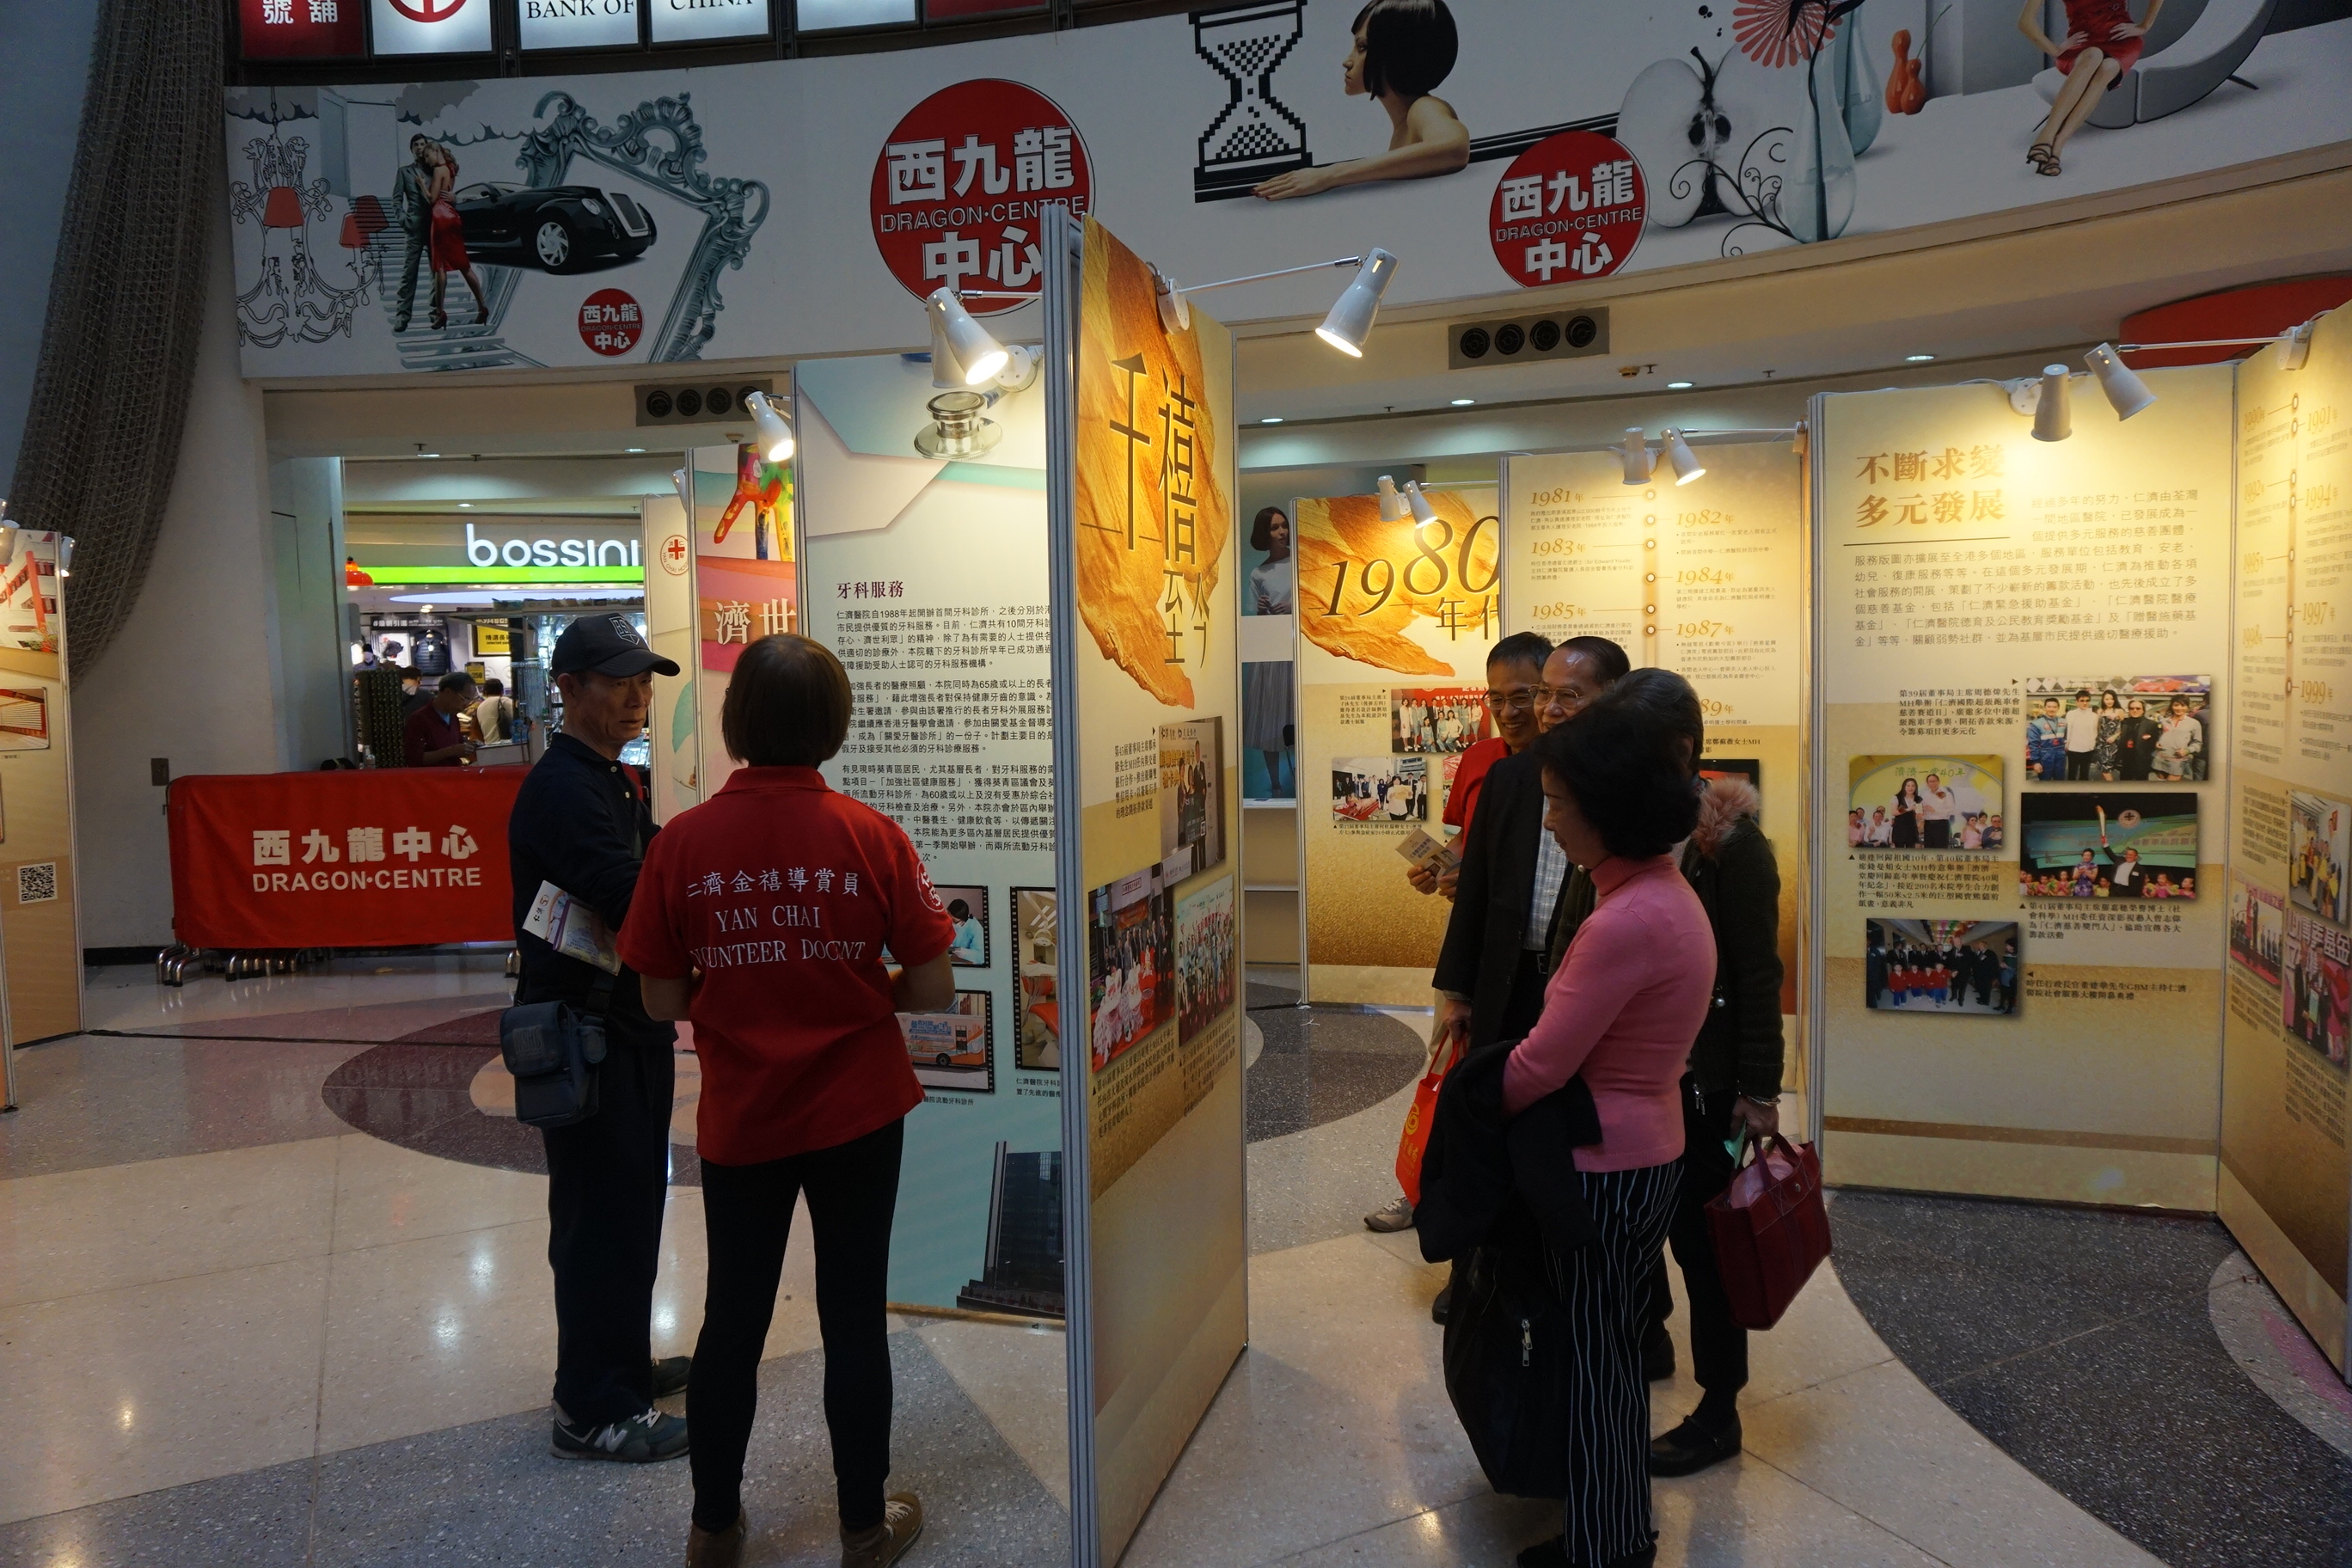 Some visitors  were interested in the history of Yan Chai Hospital